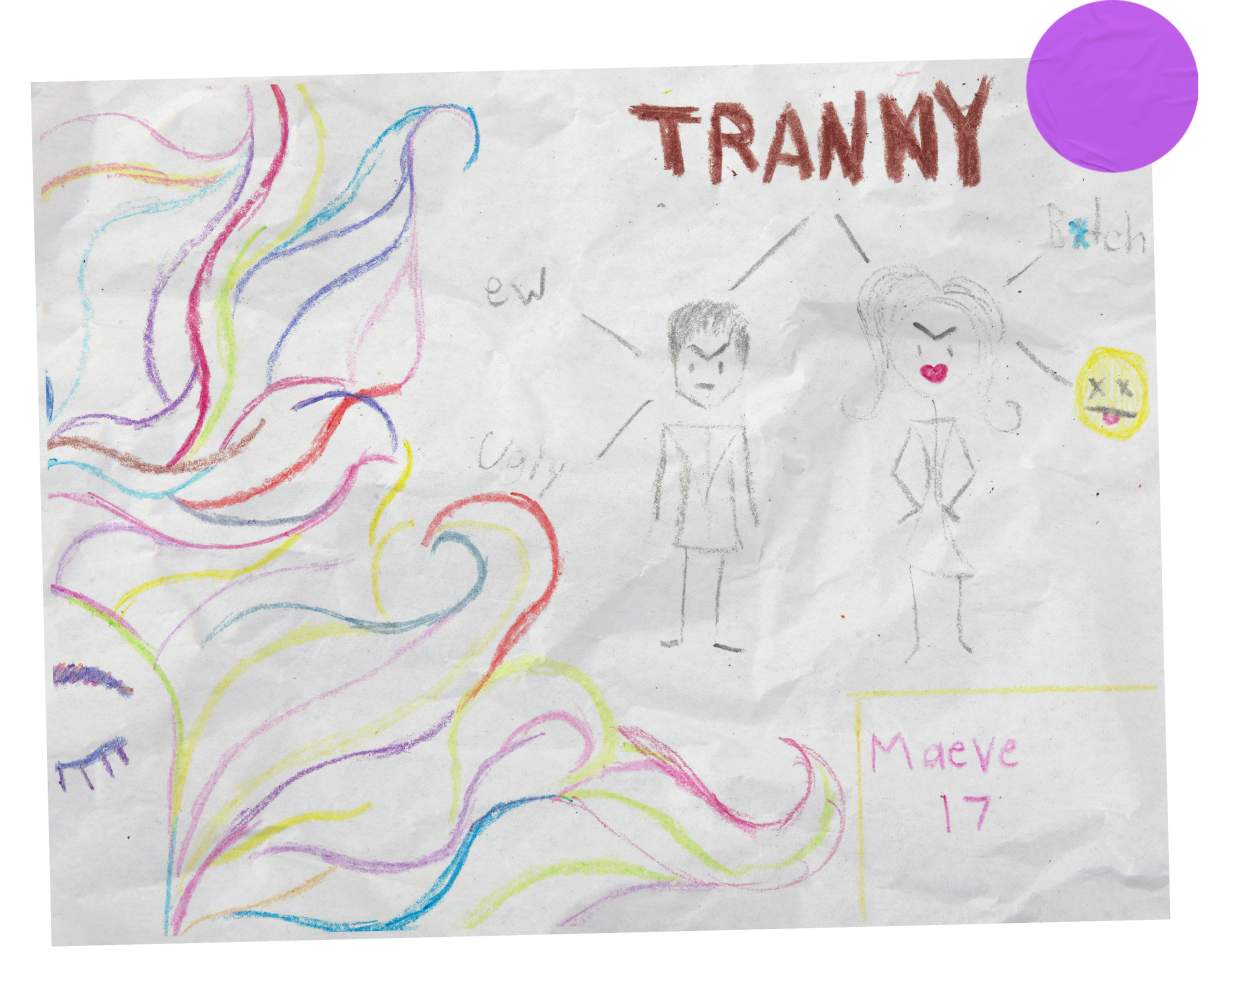 Mauve expressed the slurs and verbal abuse she faced growing up as a transgender person. (Artistic Expressions of Transgender Youth by Tony Ferraiolo)